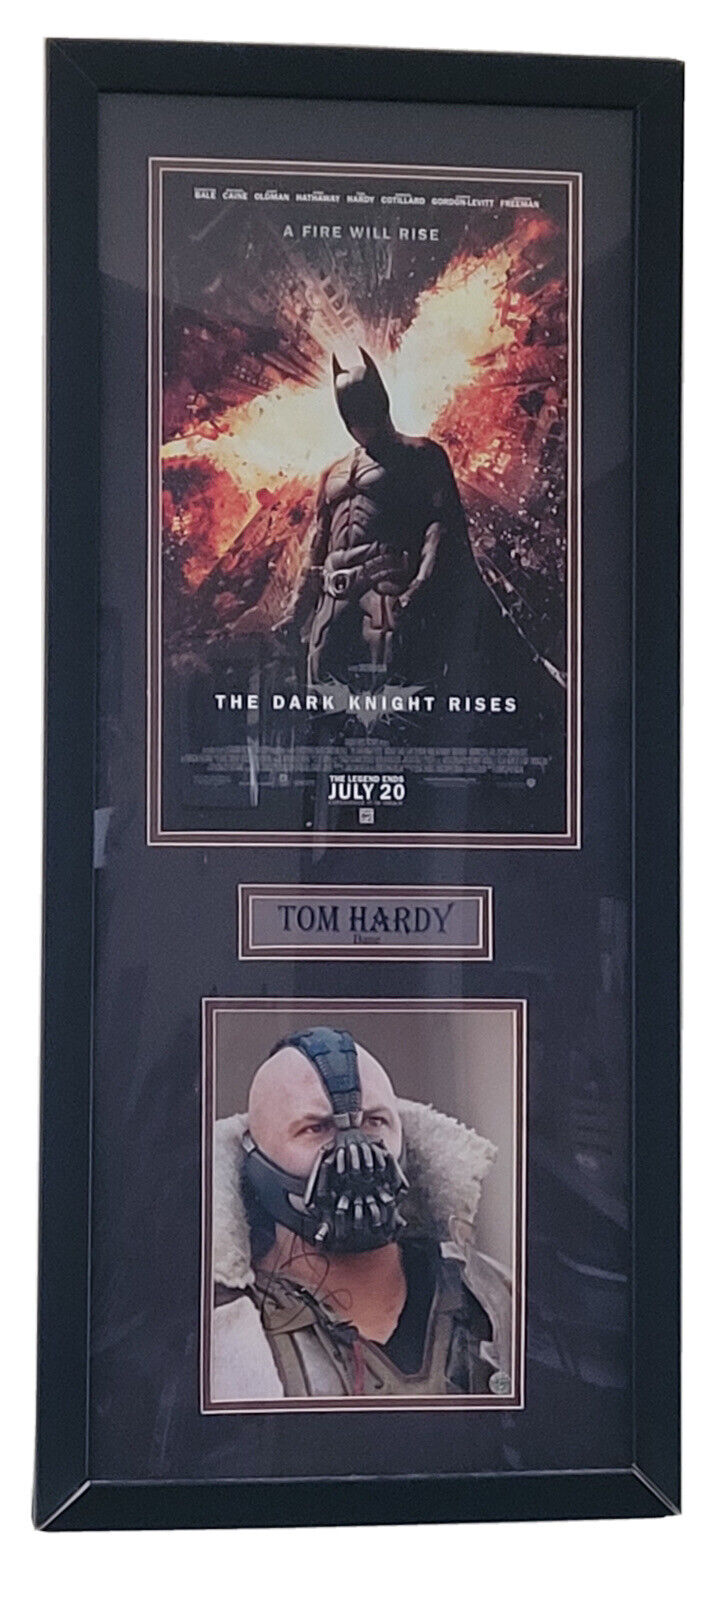 TOM HARDY SIGNED The Dark Knight Rises BANE PHOTO  WITH FRAME AUTHENTIC COA 